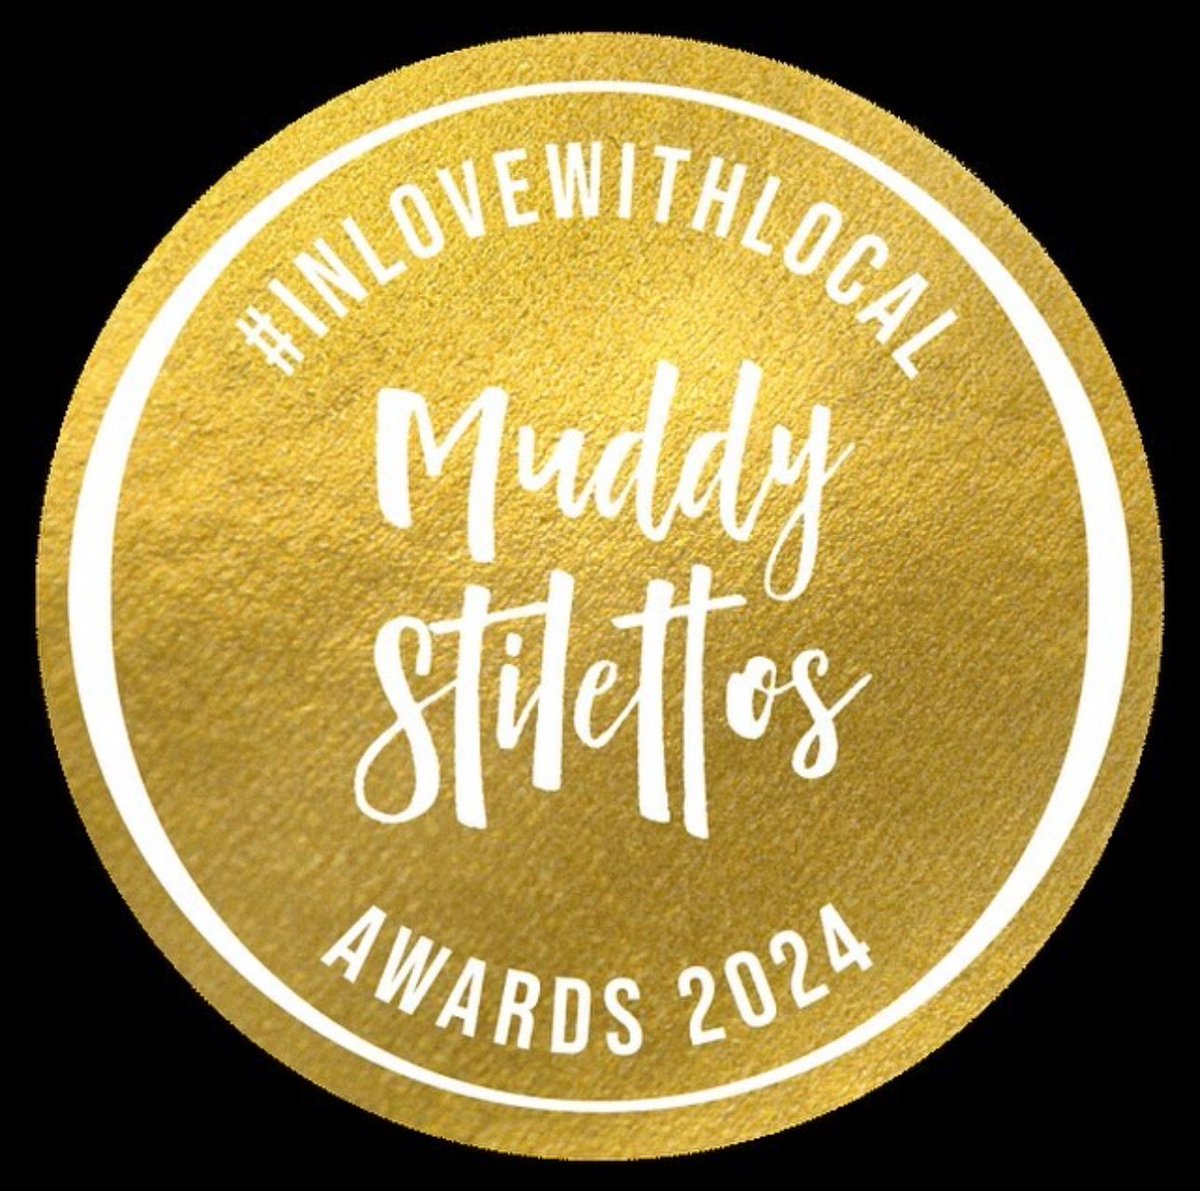 🗳️🗳️🗳️

We are thrilled to find out today that we’ve made it to the Regional Finals of @muddyglosworcs #MuddyAwards2024 🥳 in the ‘Best Wine & Beer Specialist’ category. 

Thank you for everyone who voted for us, it really means a lot.